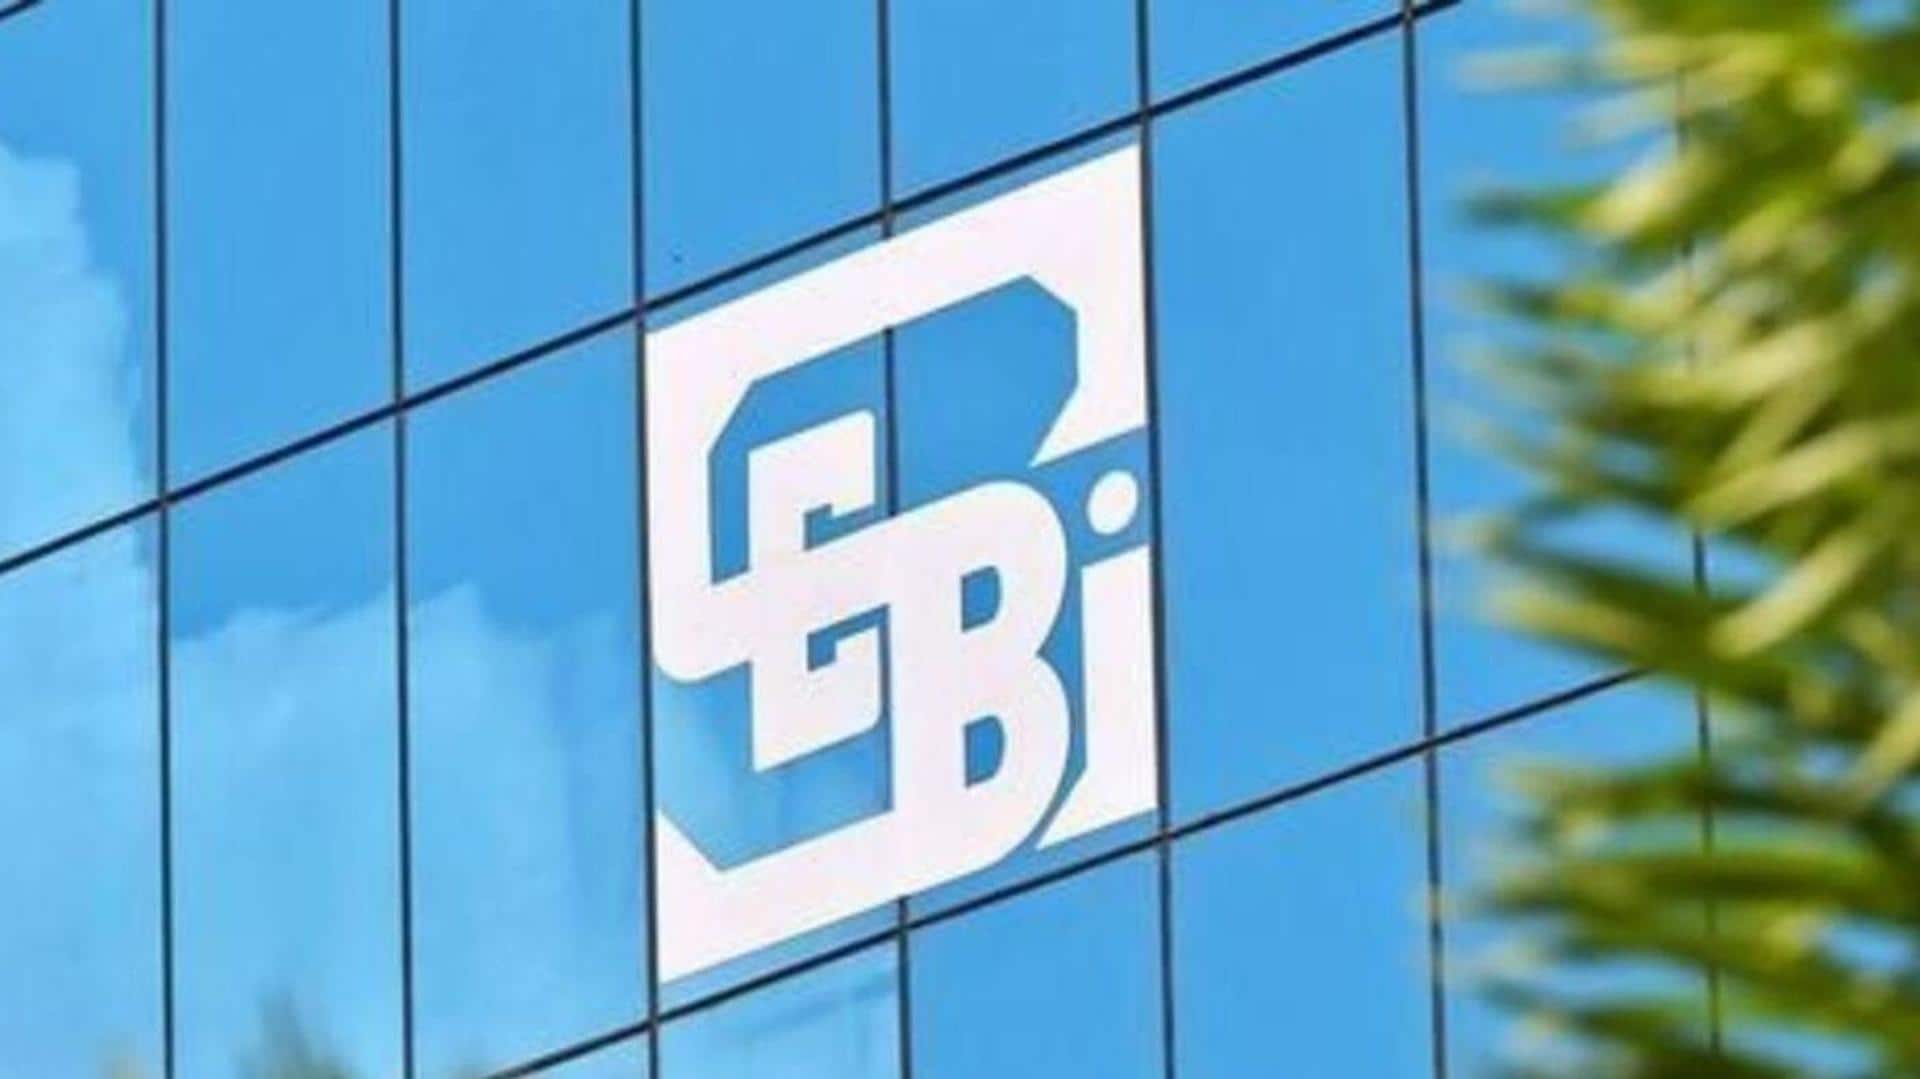 SEBI is probing Adani Group's offshore deals: Know why